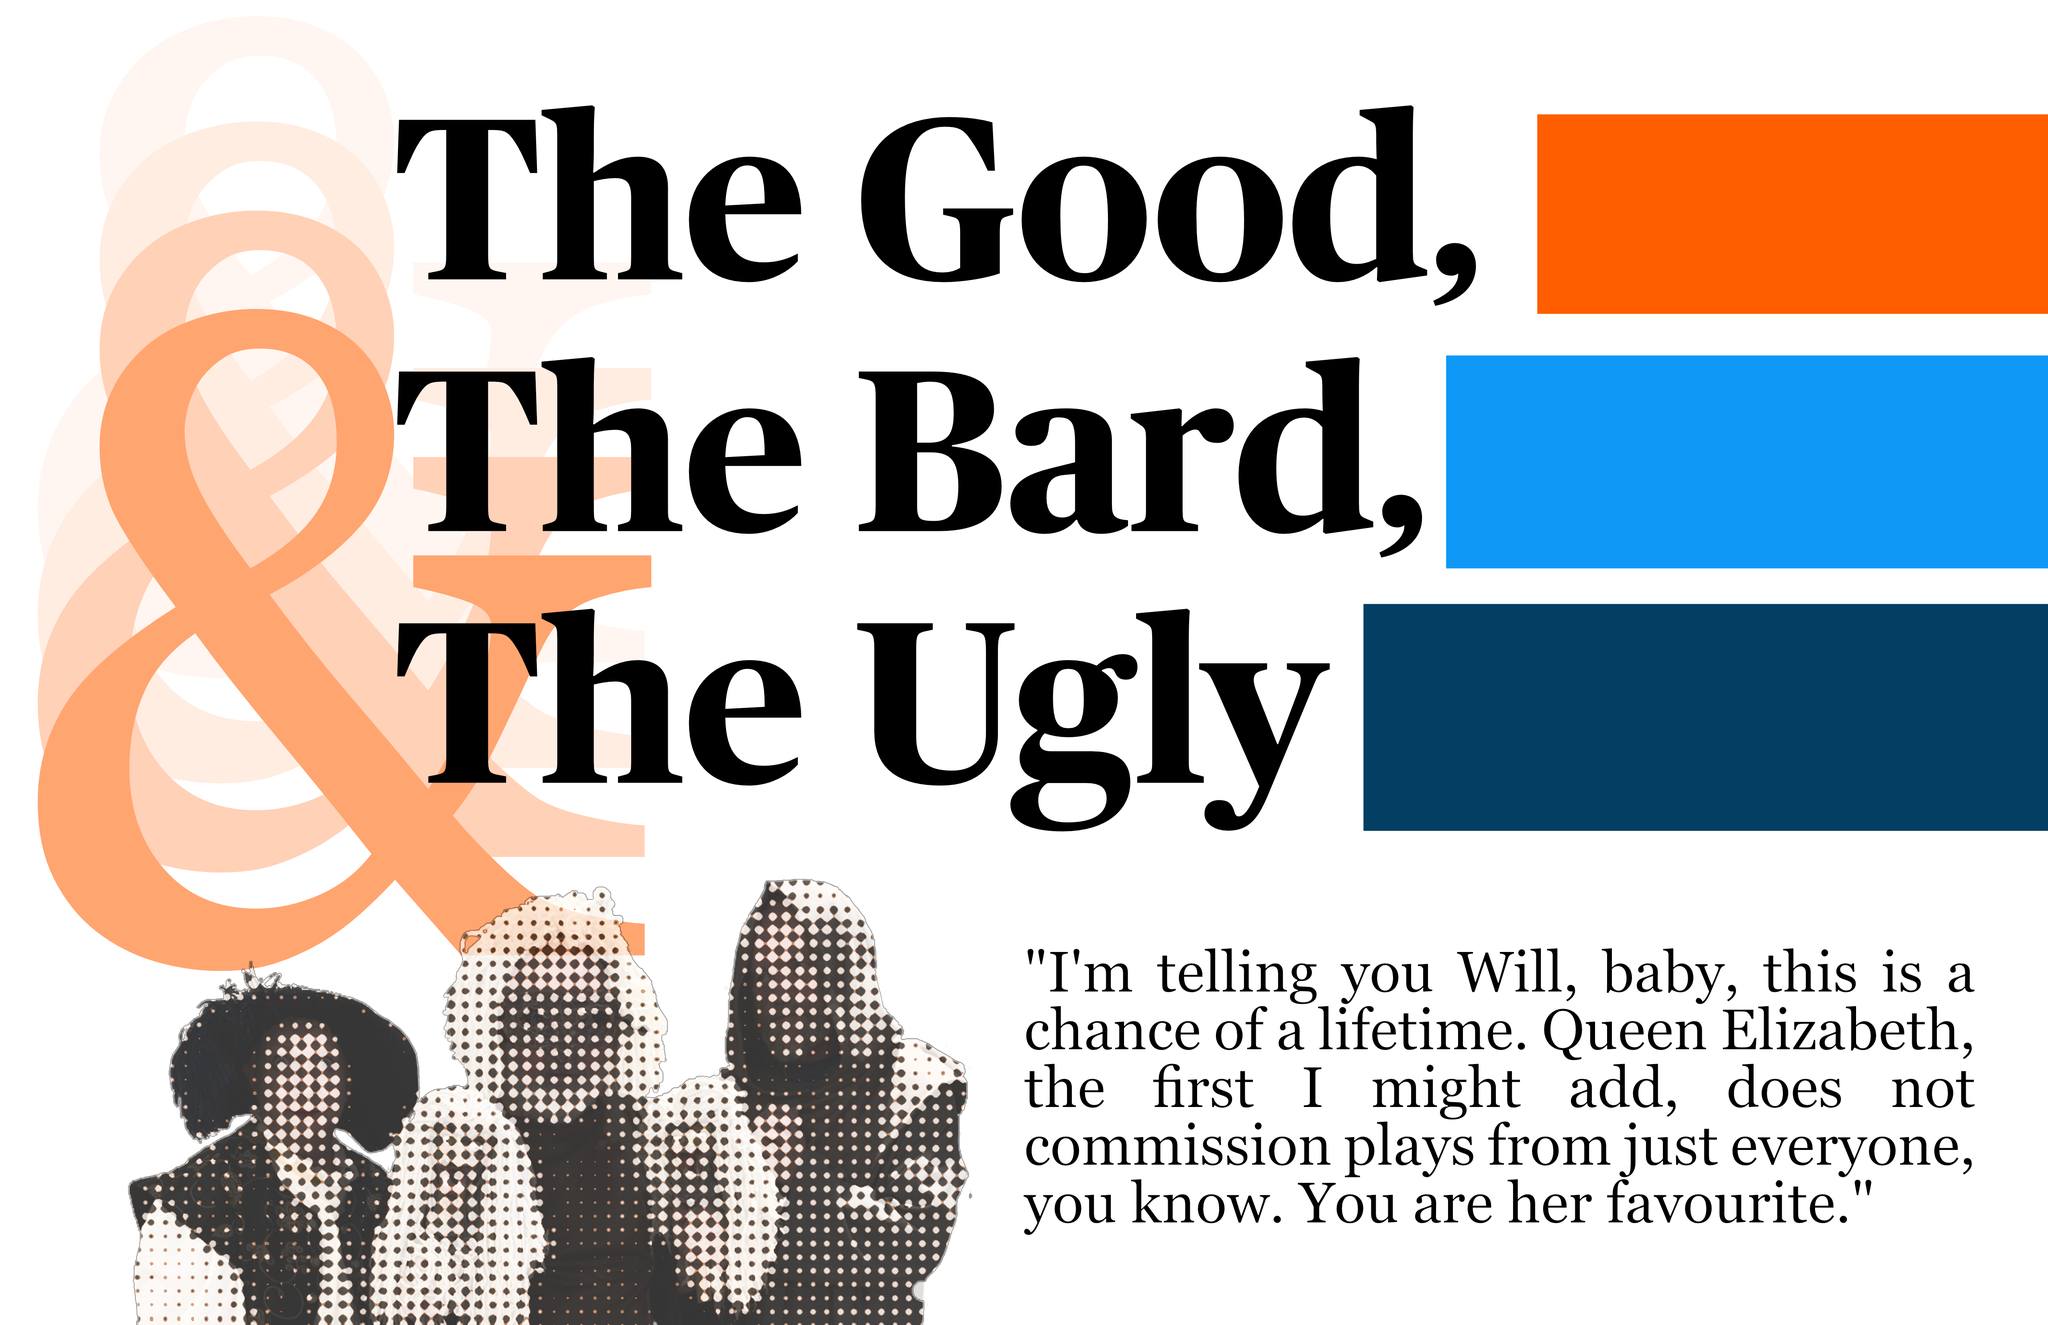 The Good, the Bard, and the Ugly